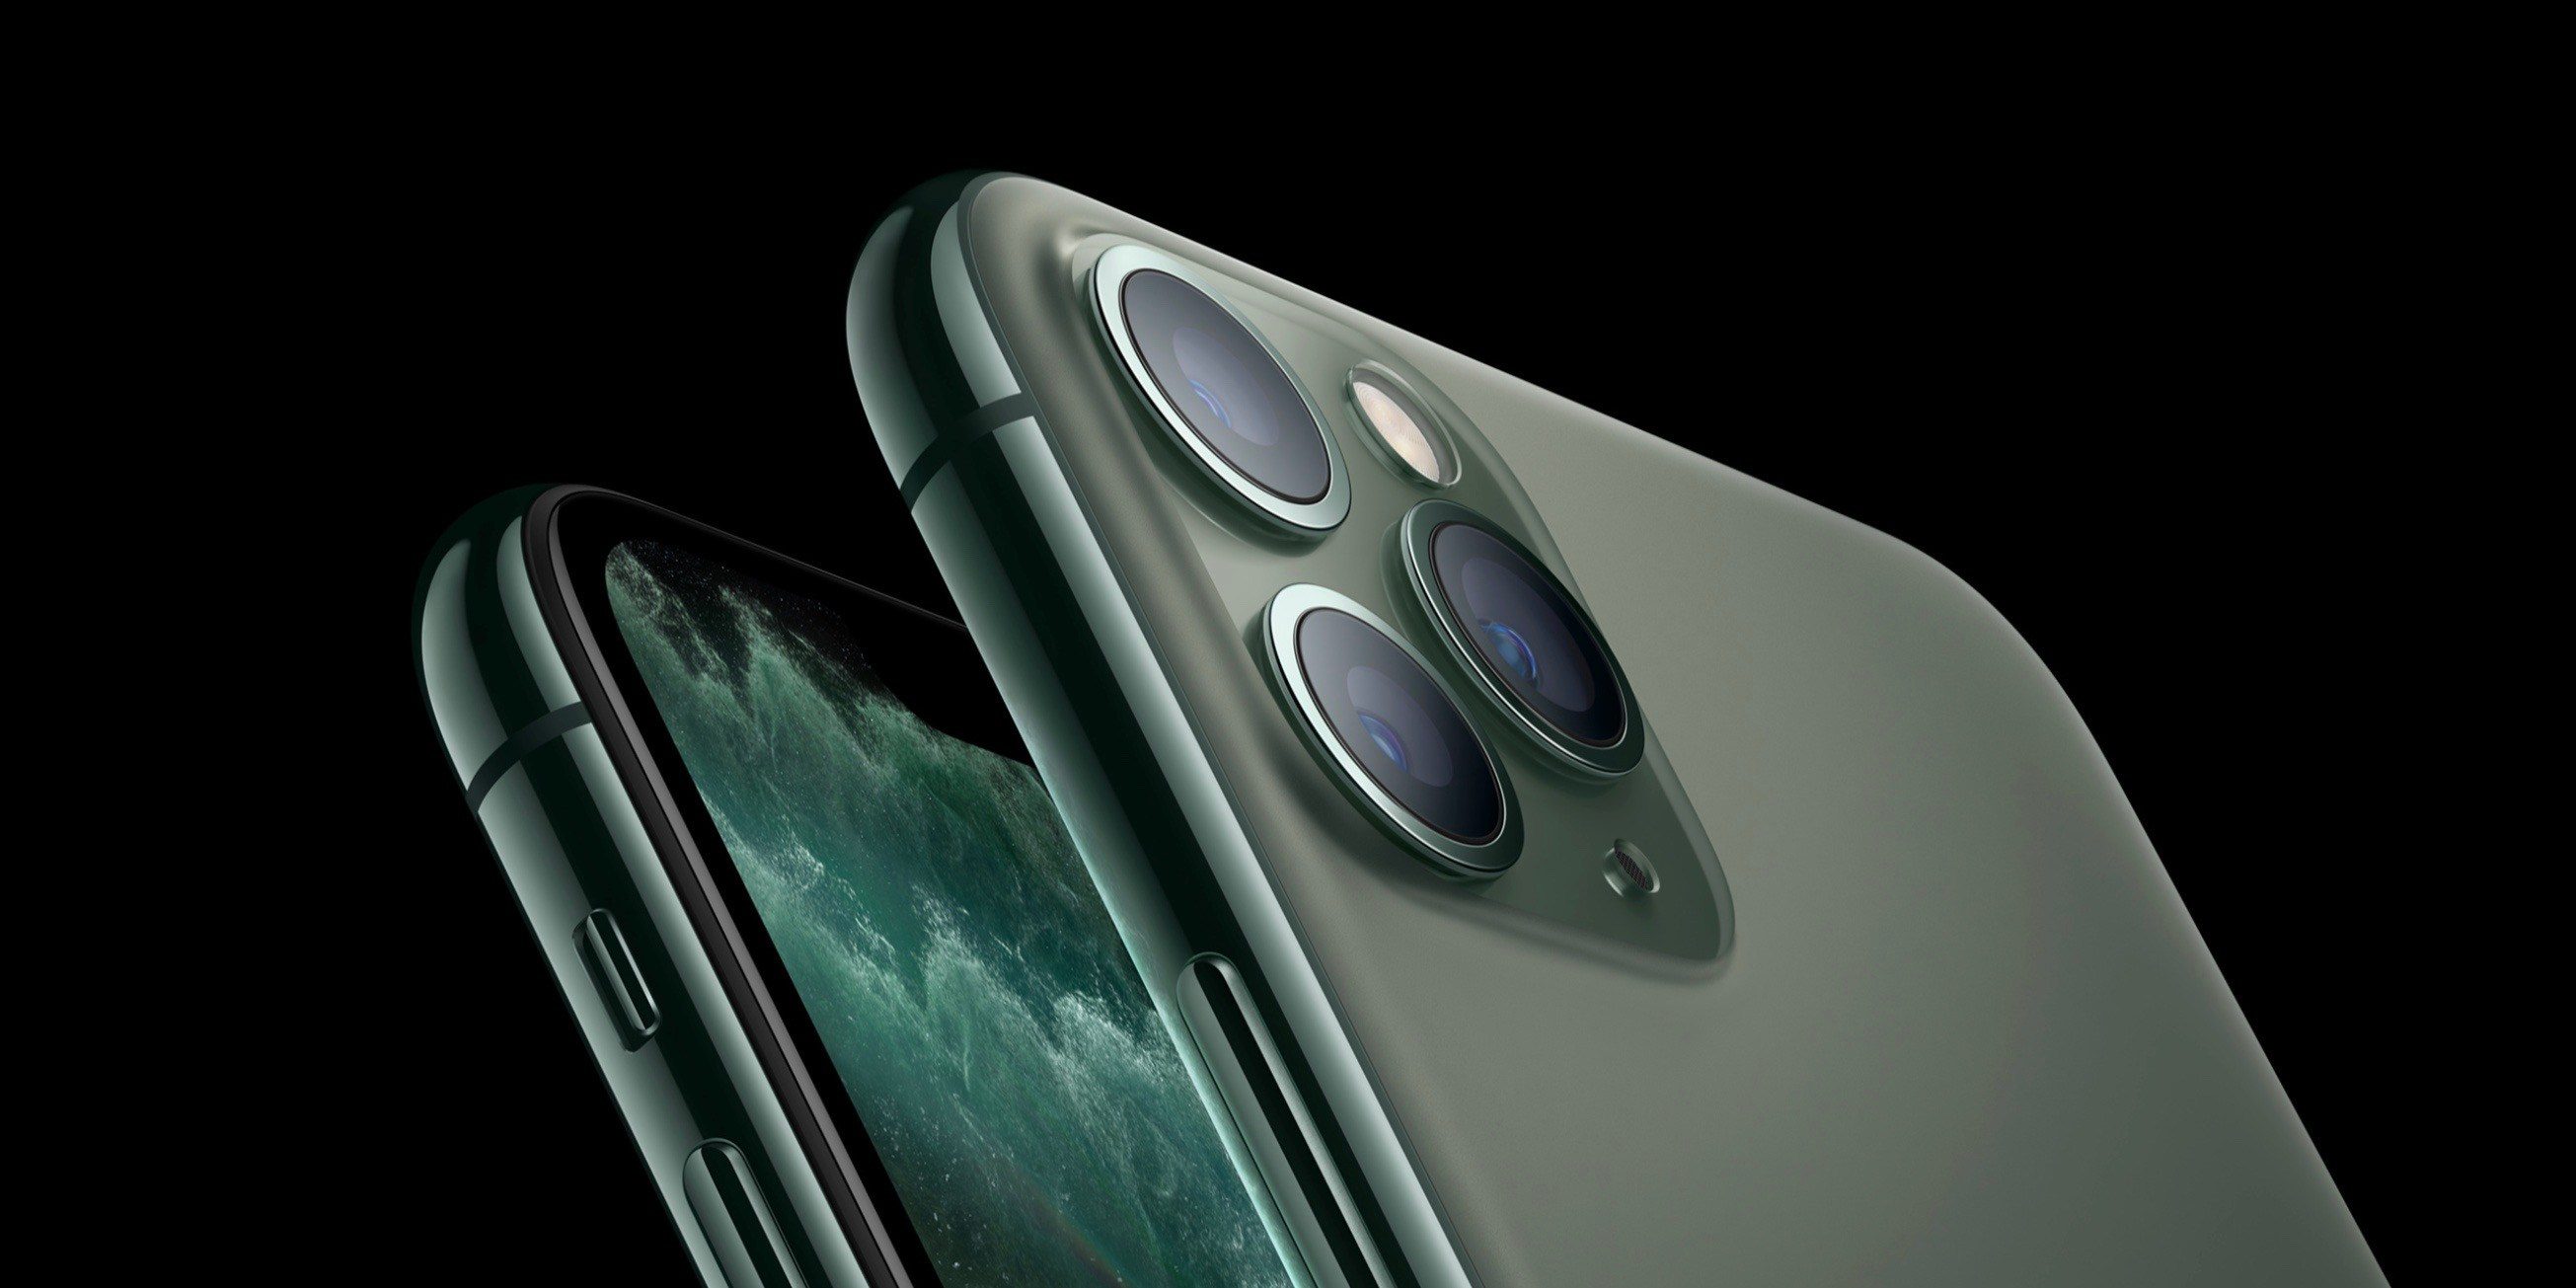 iPhone 11 Demand Better Than Expectations